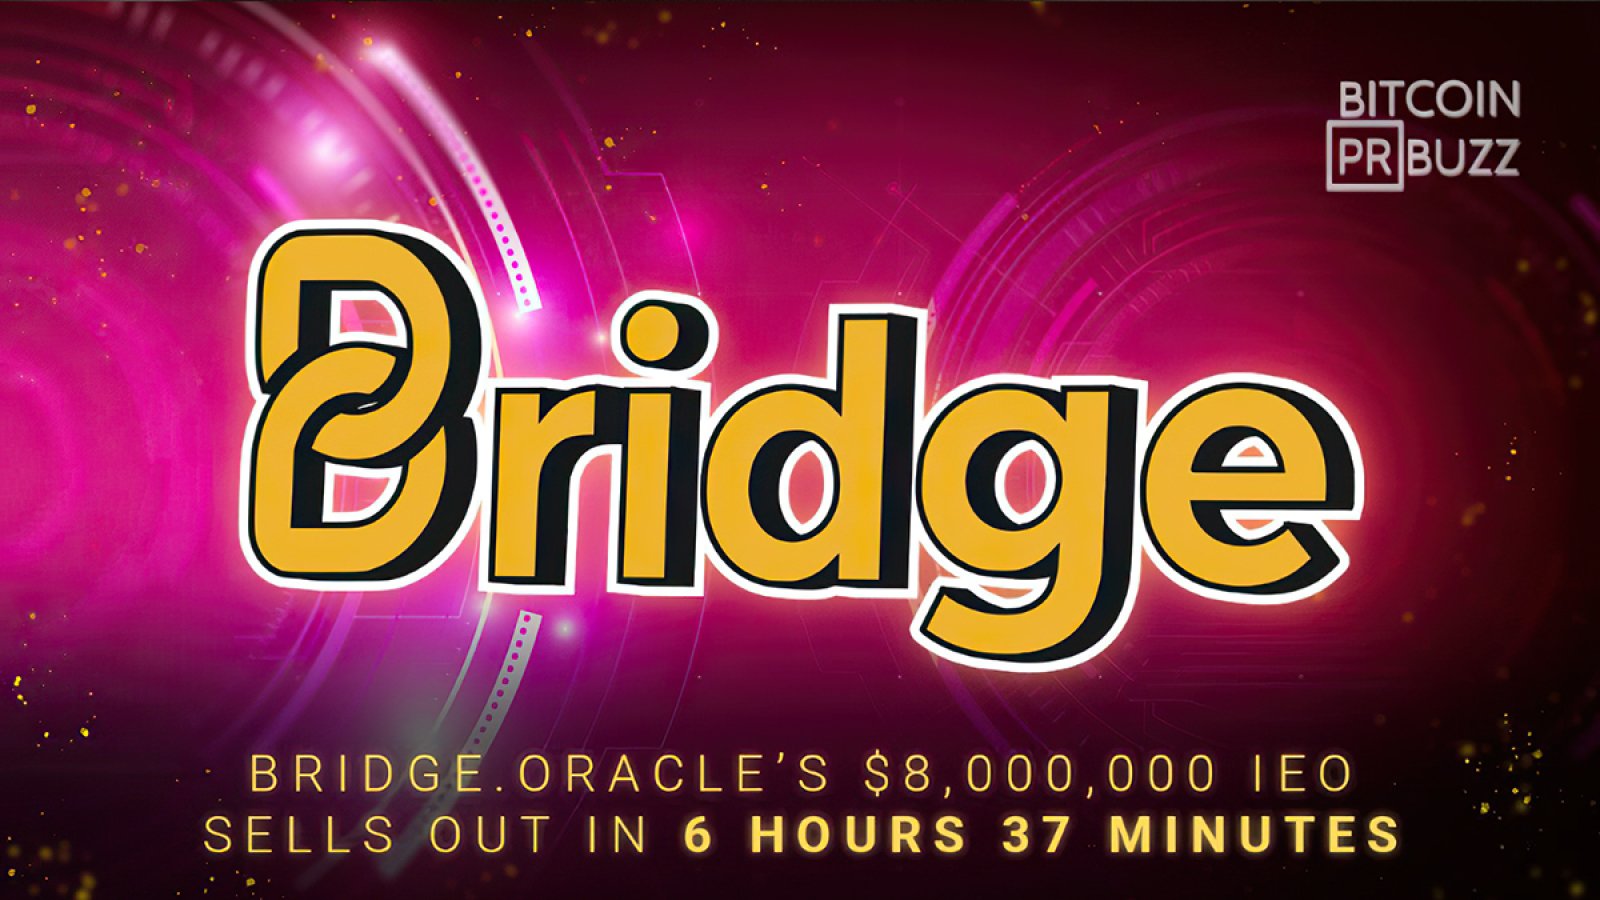 Bridge Oracle’s $8,000,000 IEO Sells Out in 6 hours and 37 minutes